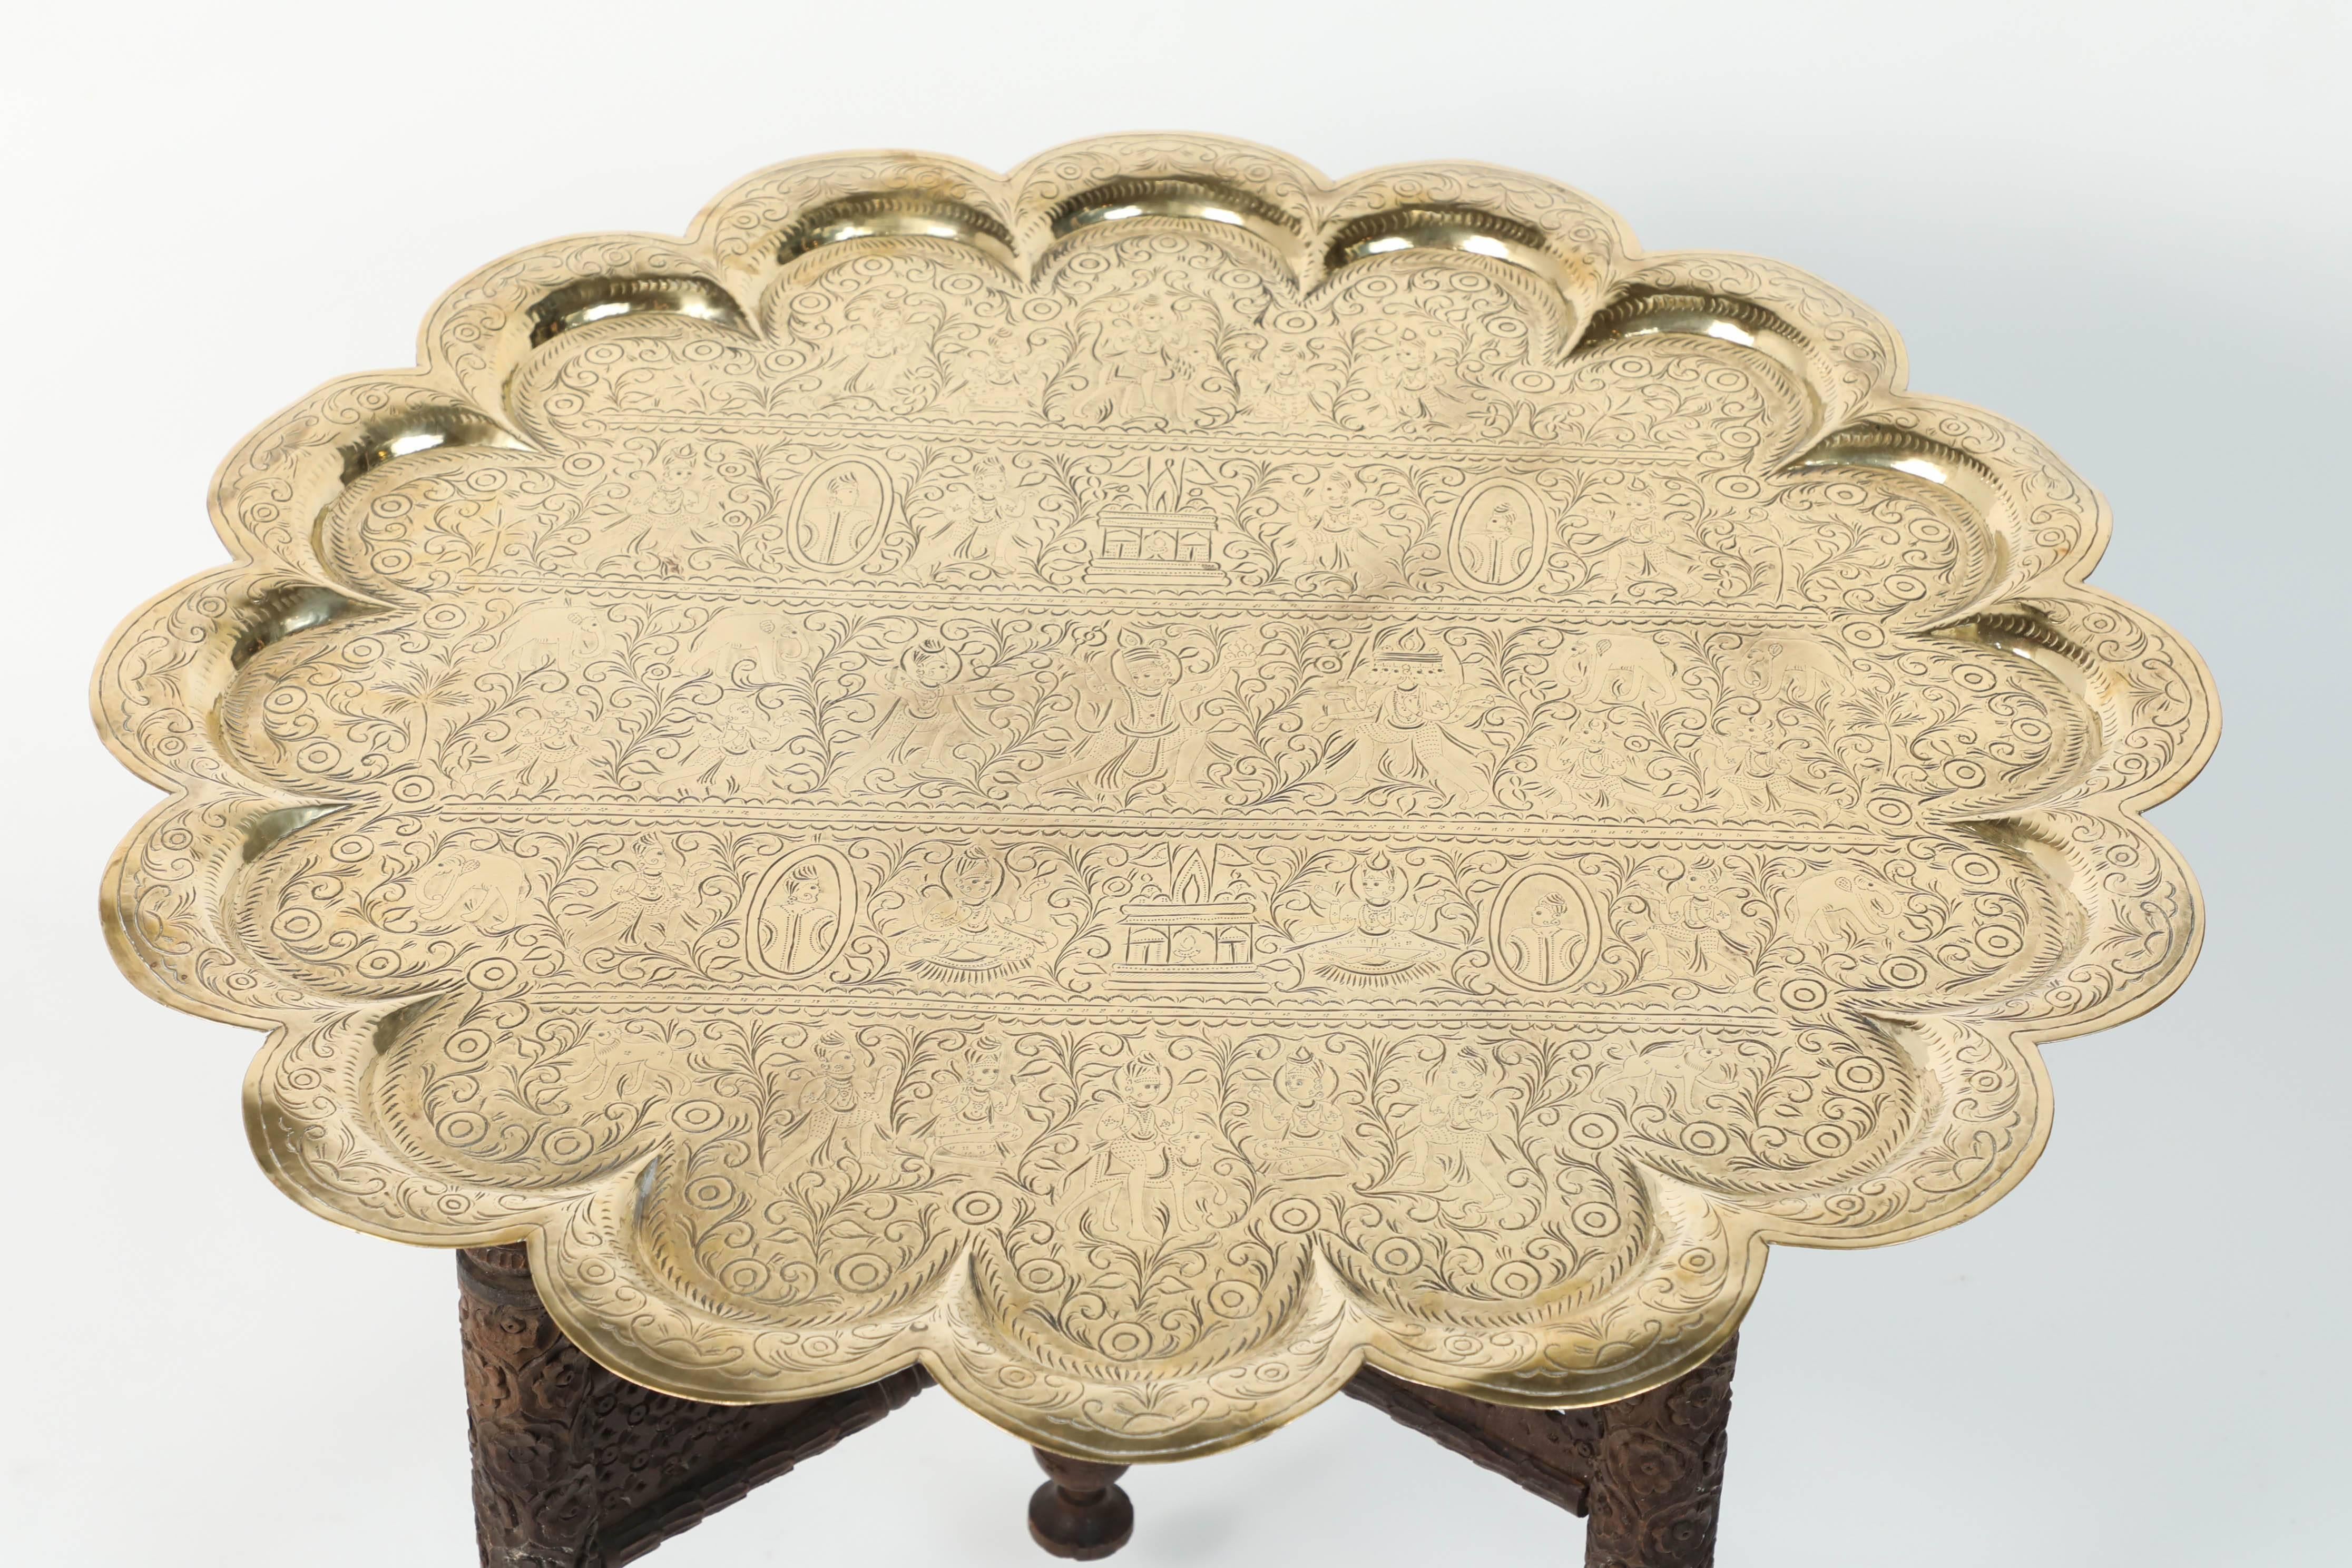 Anglo Indian engraved and embossed round polished gold brass tray table.
Polished Middle Eastern style brass tray standing on folding handcrafted wooden base with four legs.
Very hard to find Moorish design hand-hammered brass tray finely